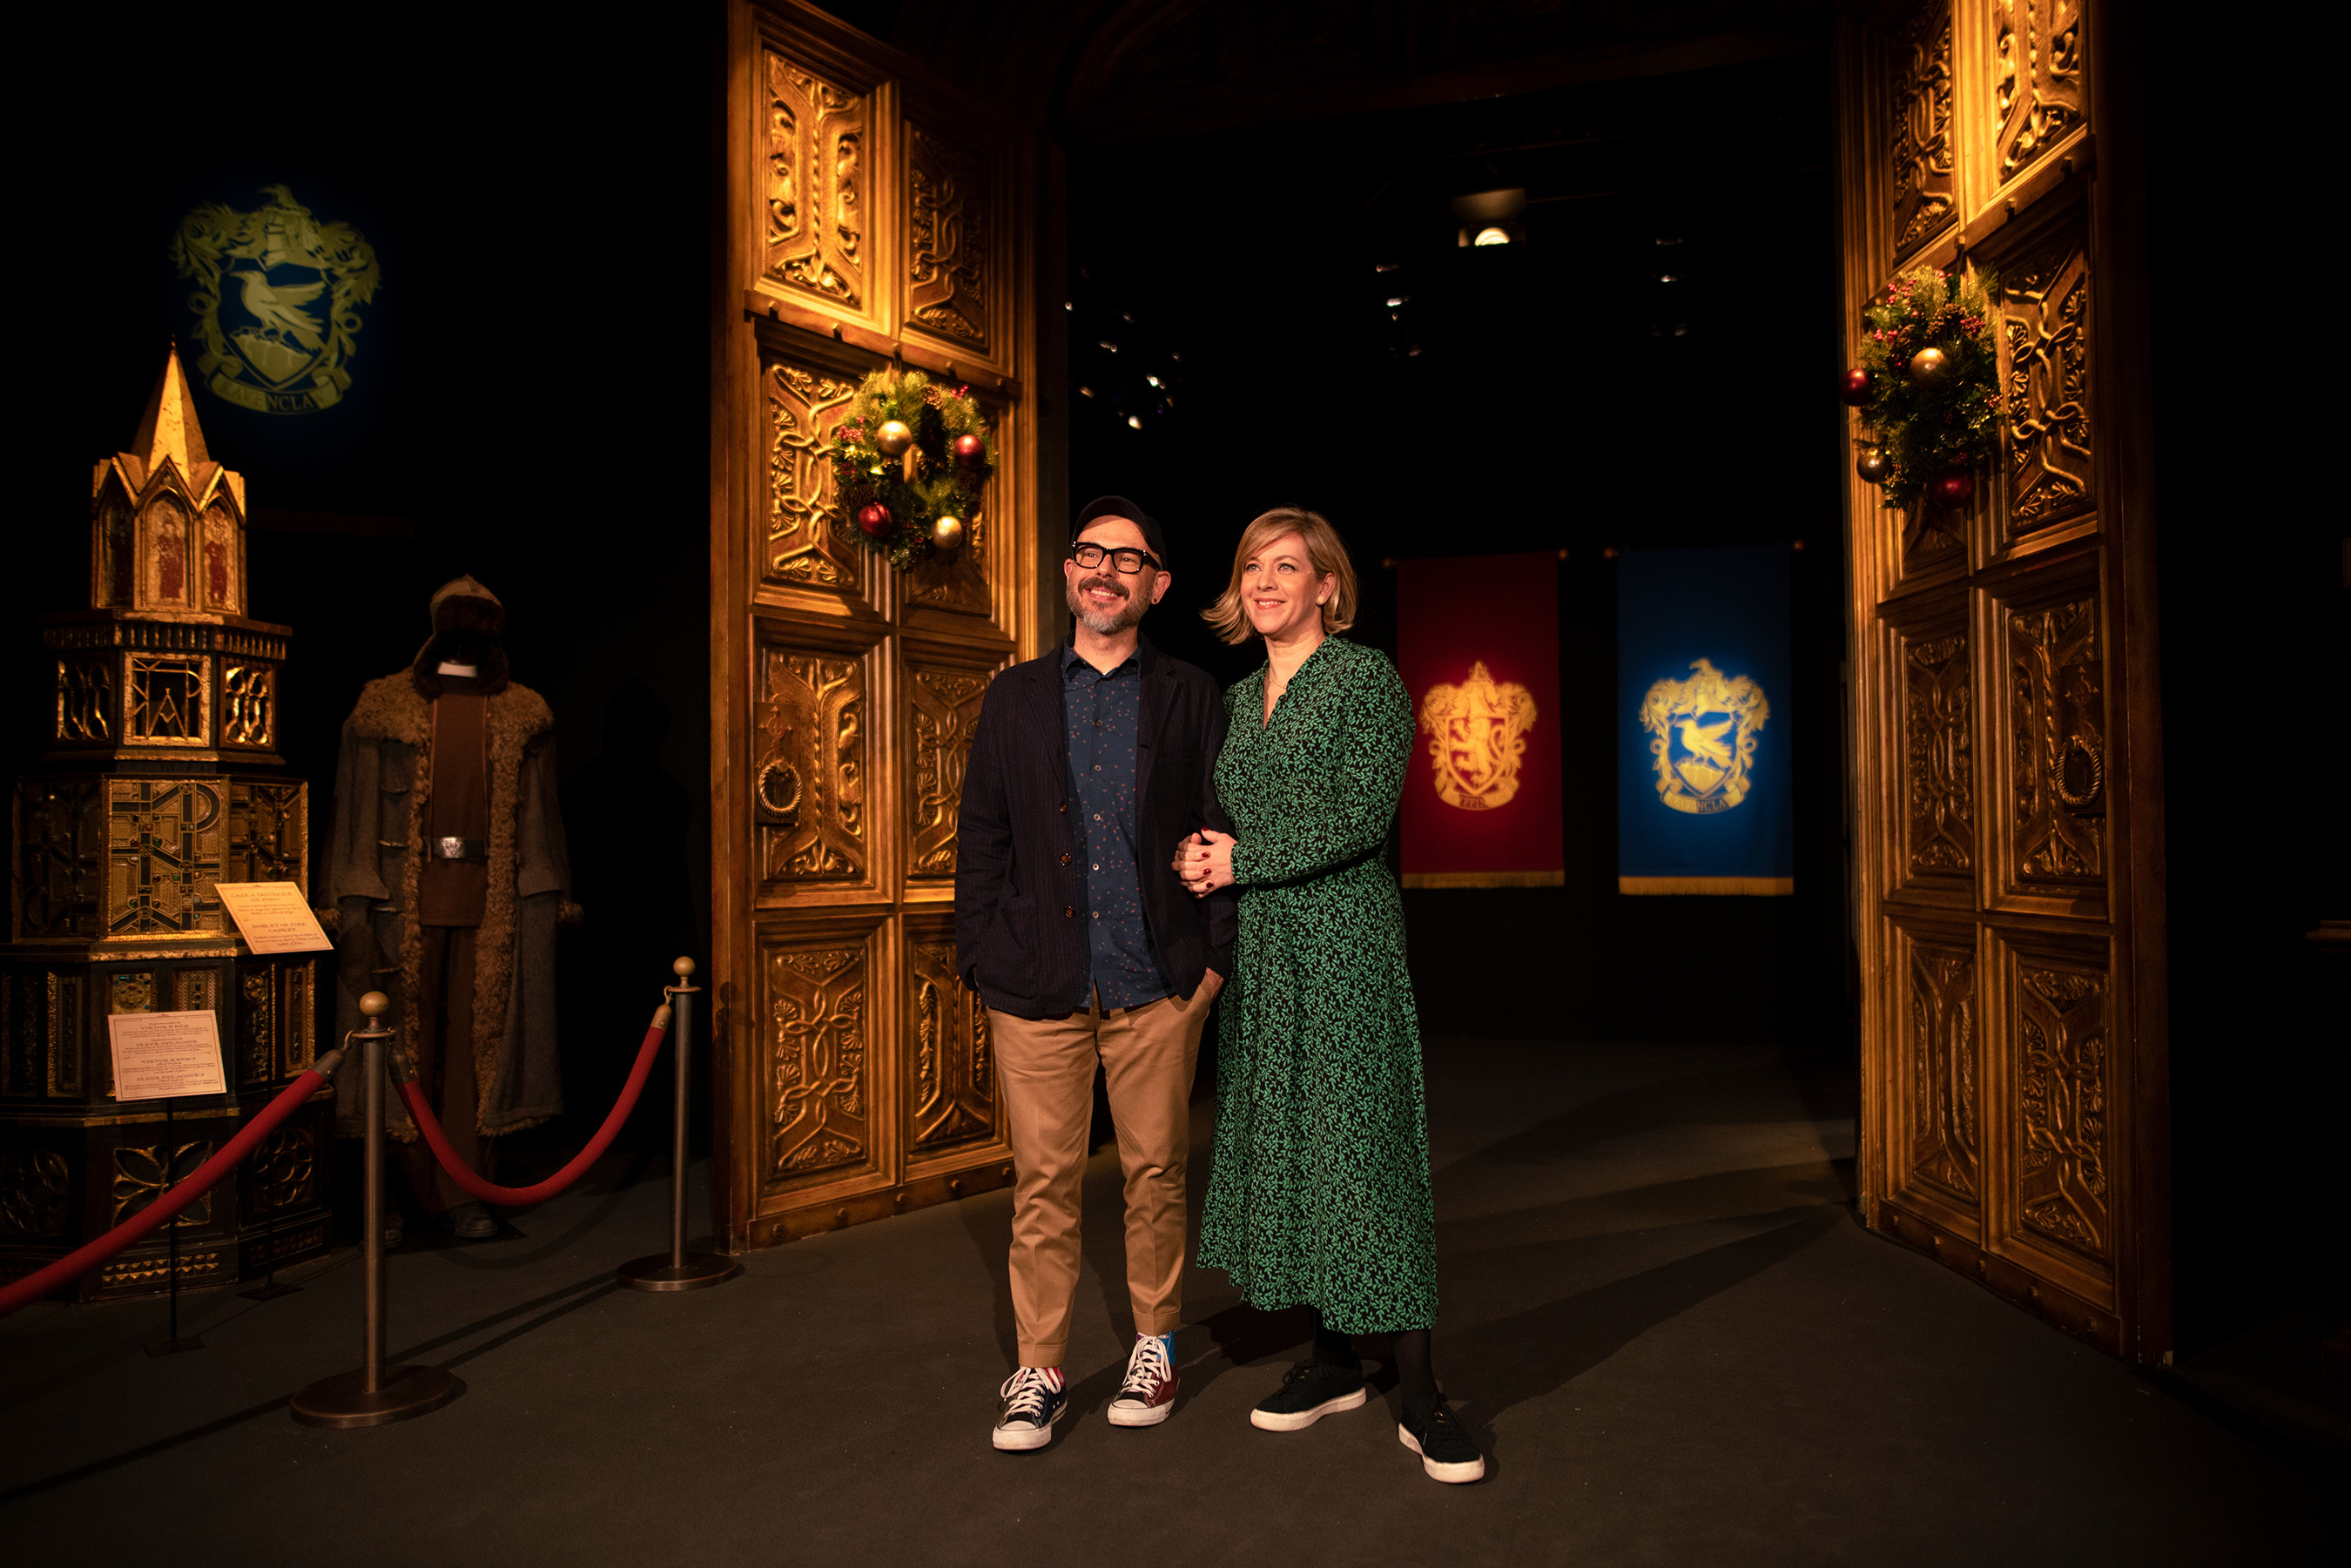 Harry Potter The Exhibition Opens This Saturday At The Pavilion Of Portugal